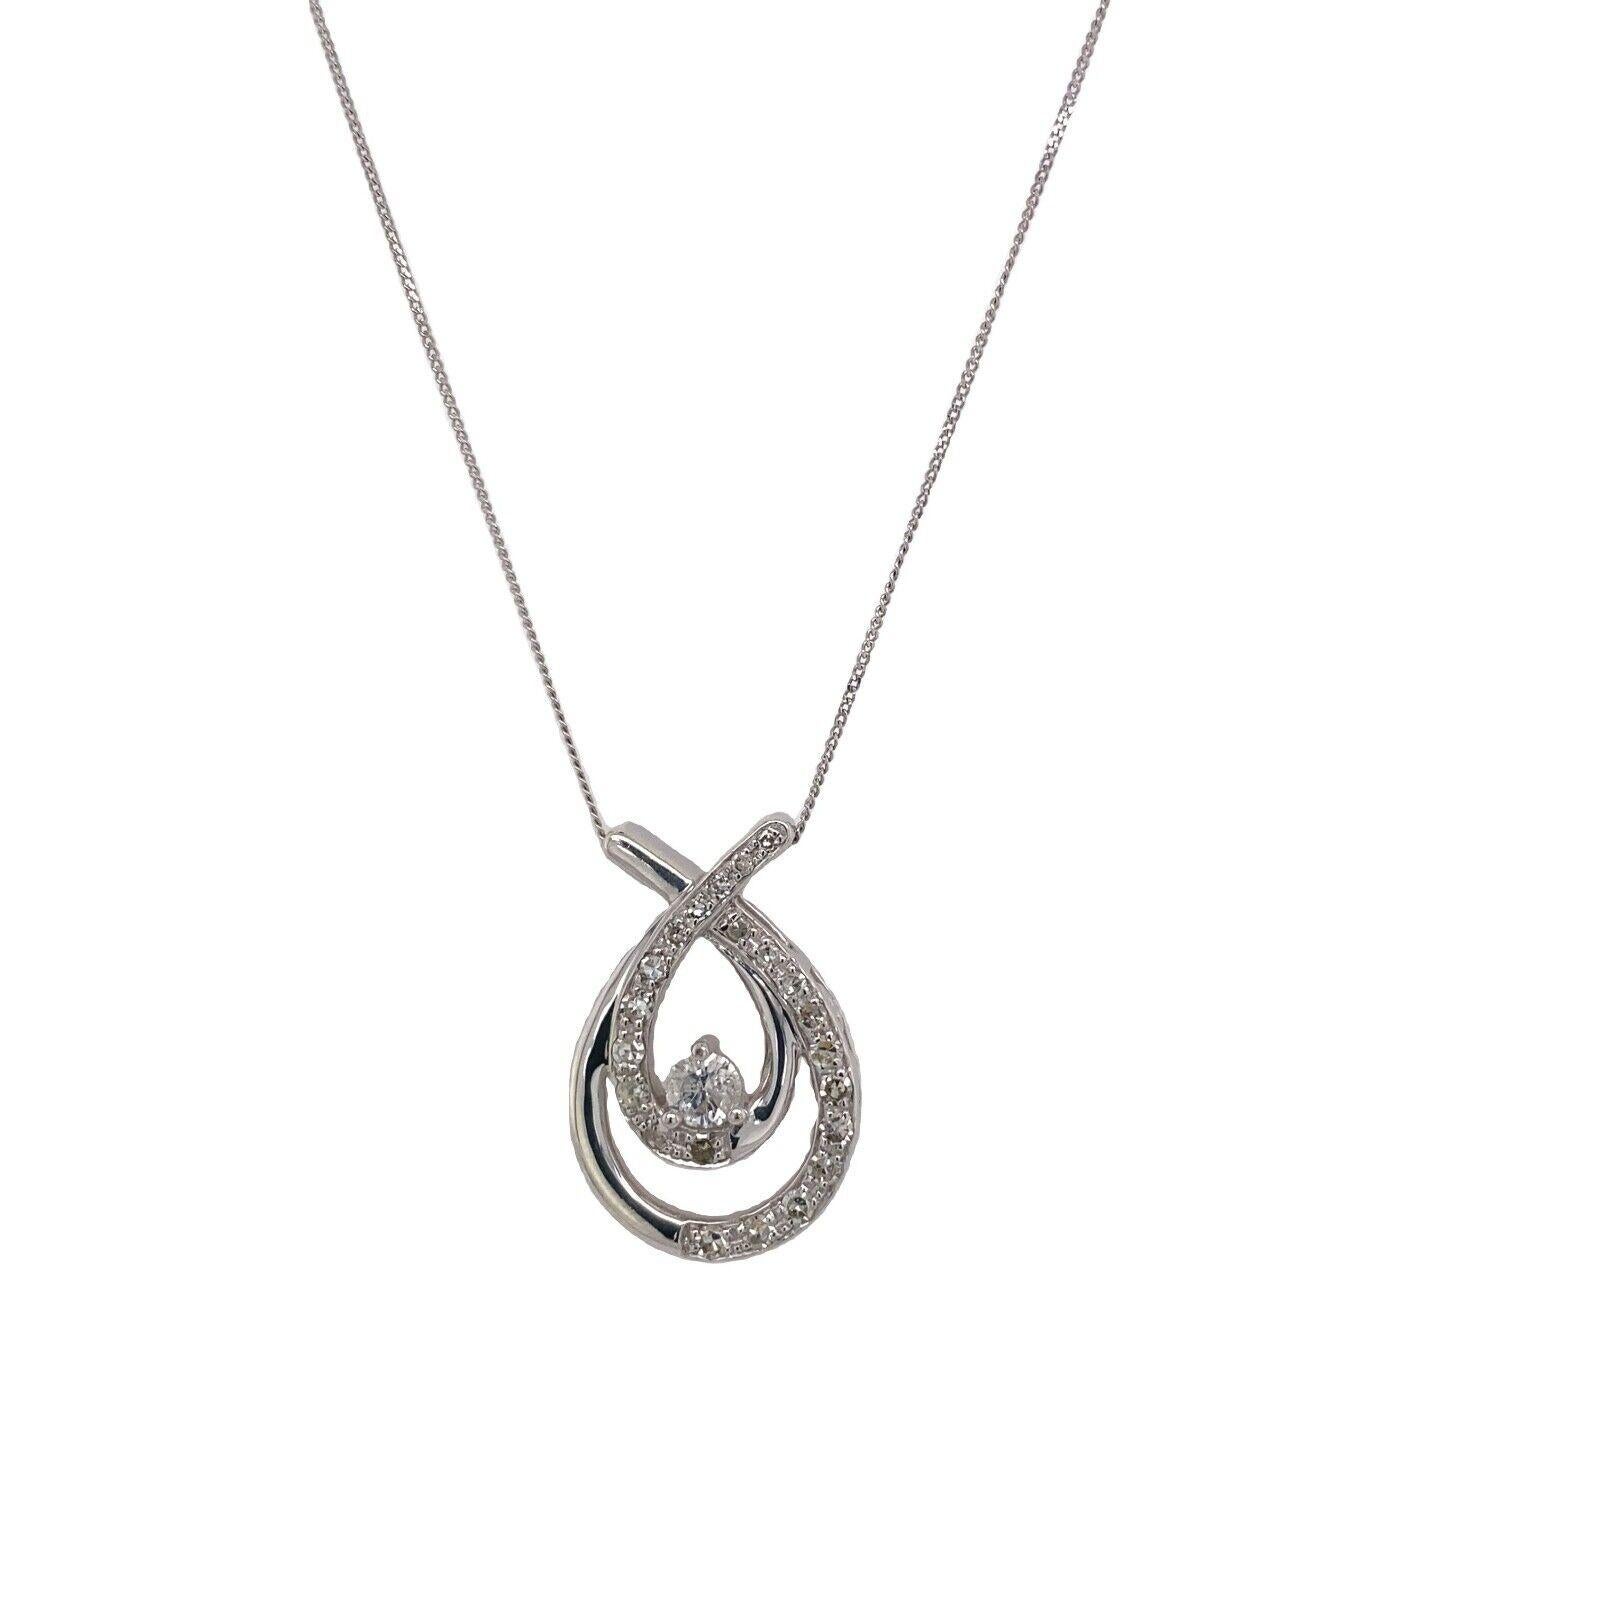 9ct White Gold Diamond Pendant Set With 0.33ct of Diamonds

This beautiful diamond pendant is made from 9ct white gold and has a total diamond weight of 0.33ct. This is a very pretty diamond pendant that will be a very special gift for